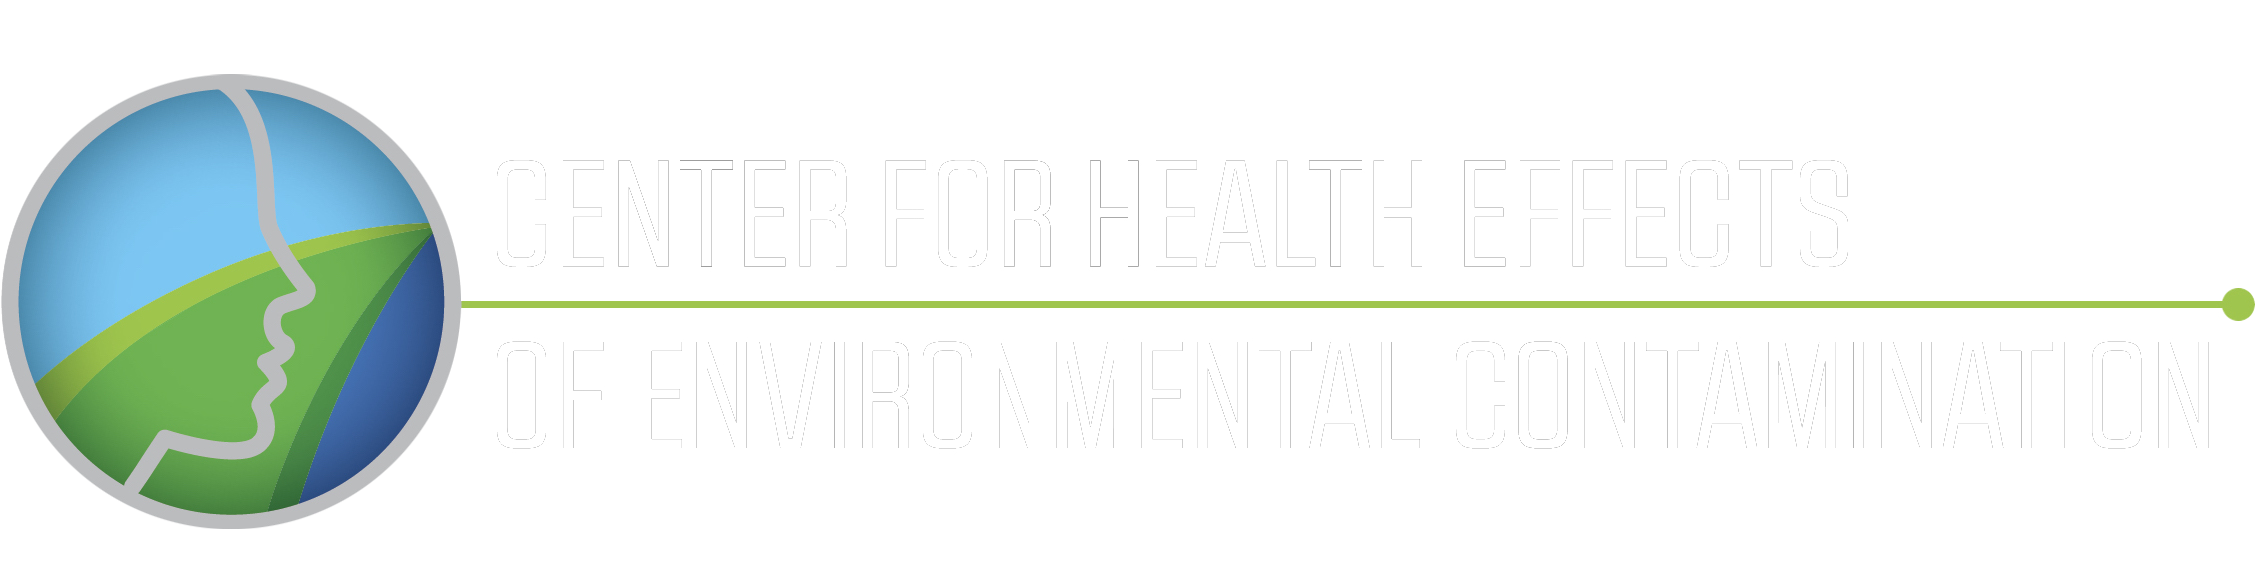 Center for Health Effects of Environmental Contamination